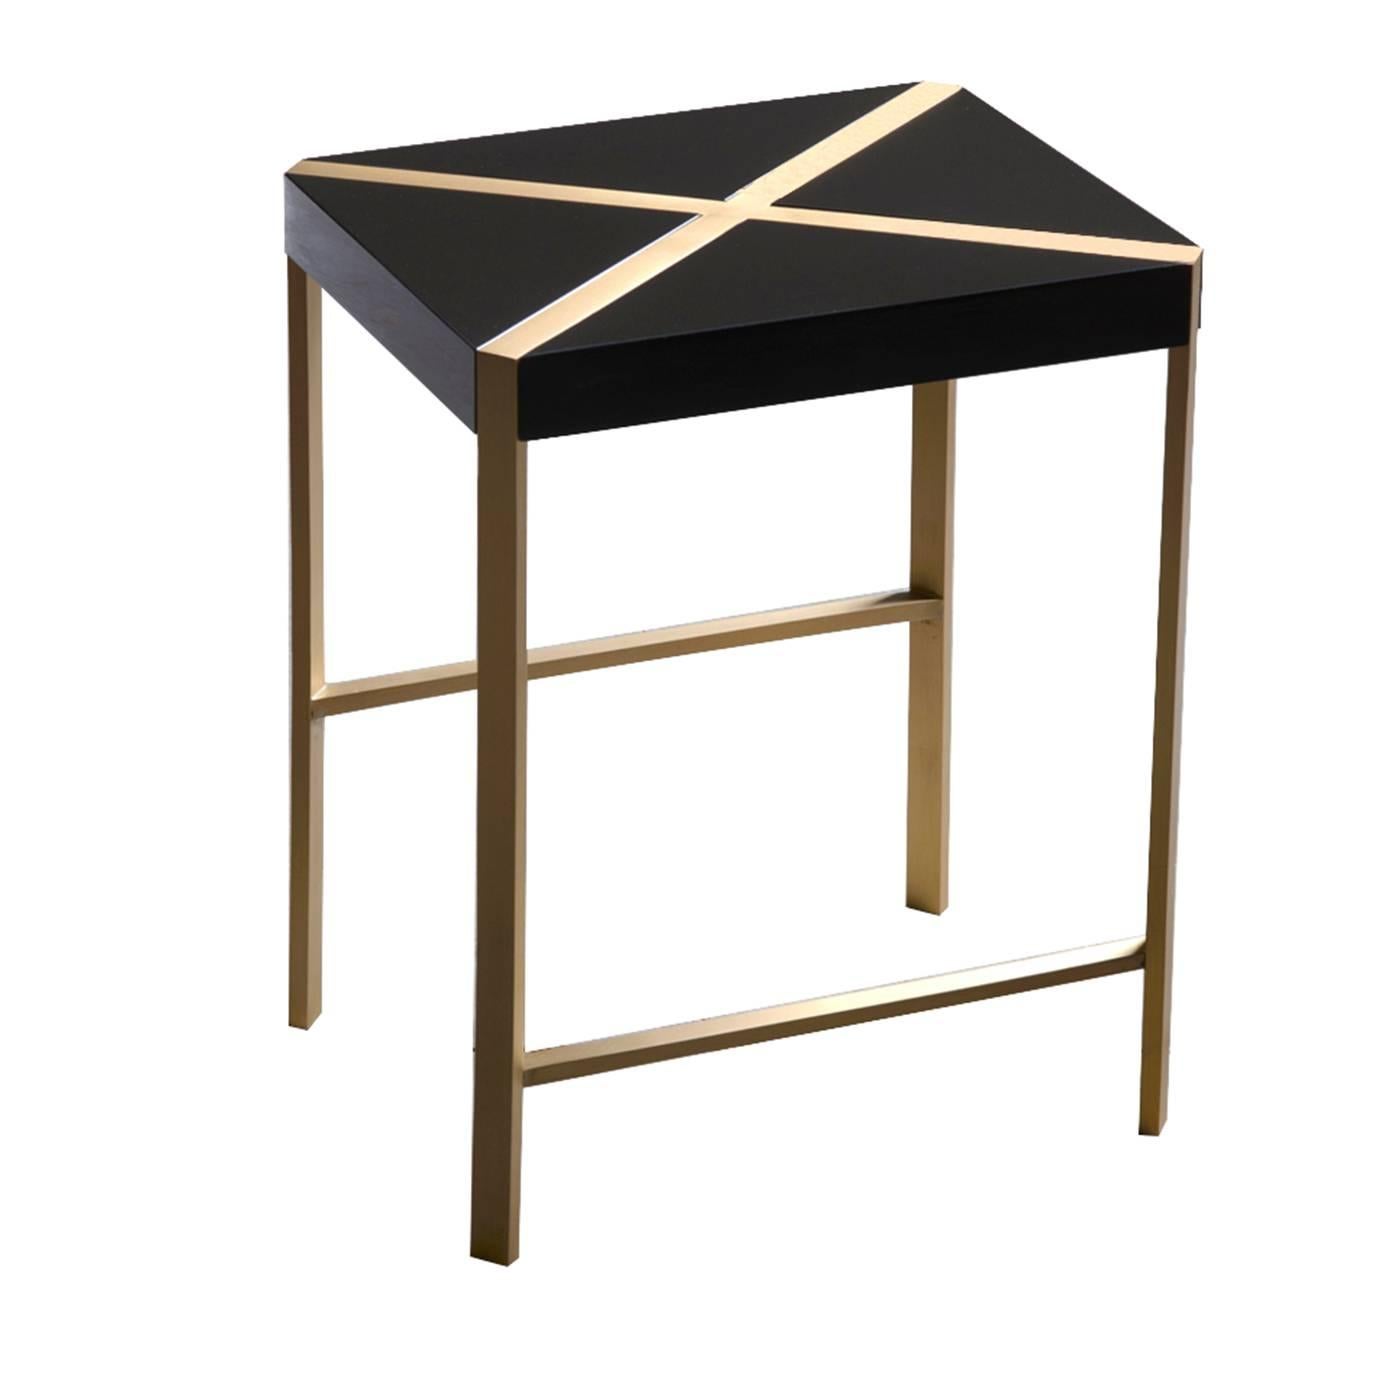 This striking stool can be used at a dining table and complements any of the pieces in the Metaphysics collection. Its legs are in brass and the wood top, decorated with a diagonal brass cross, is finished with a hand-applied premium resistant